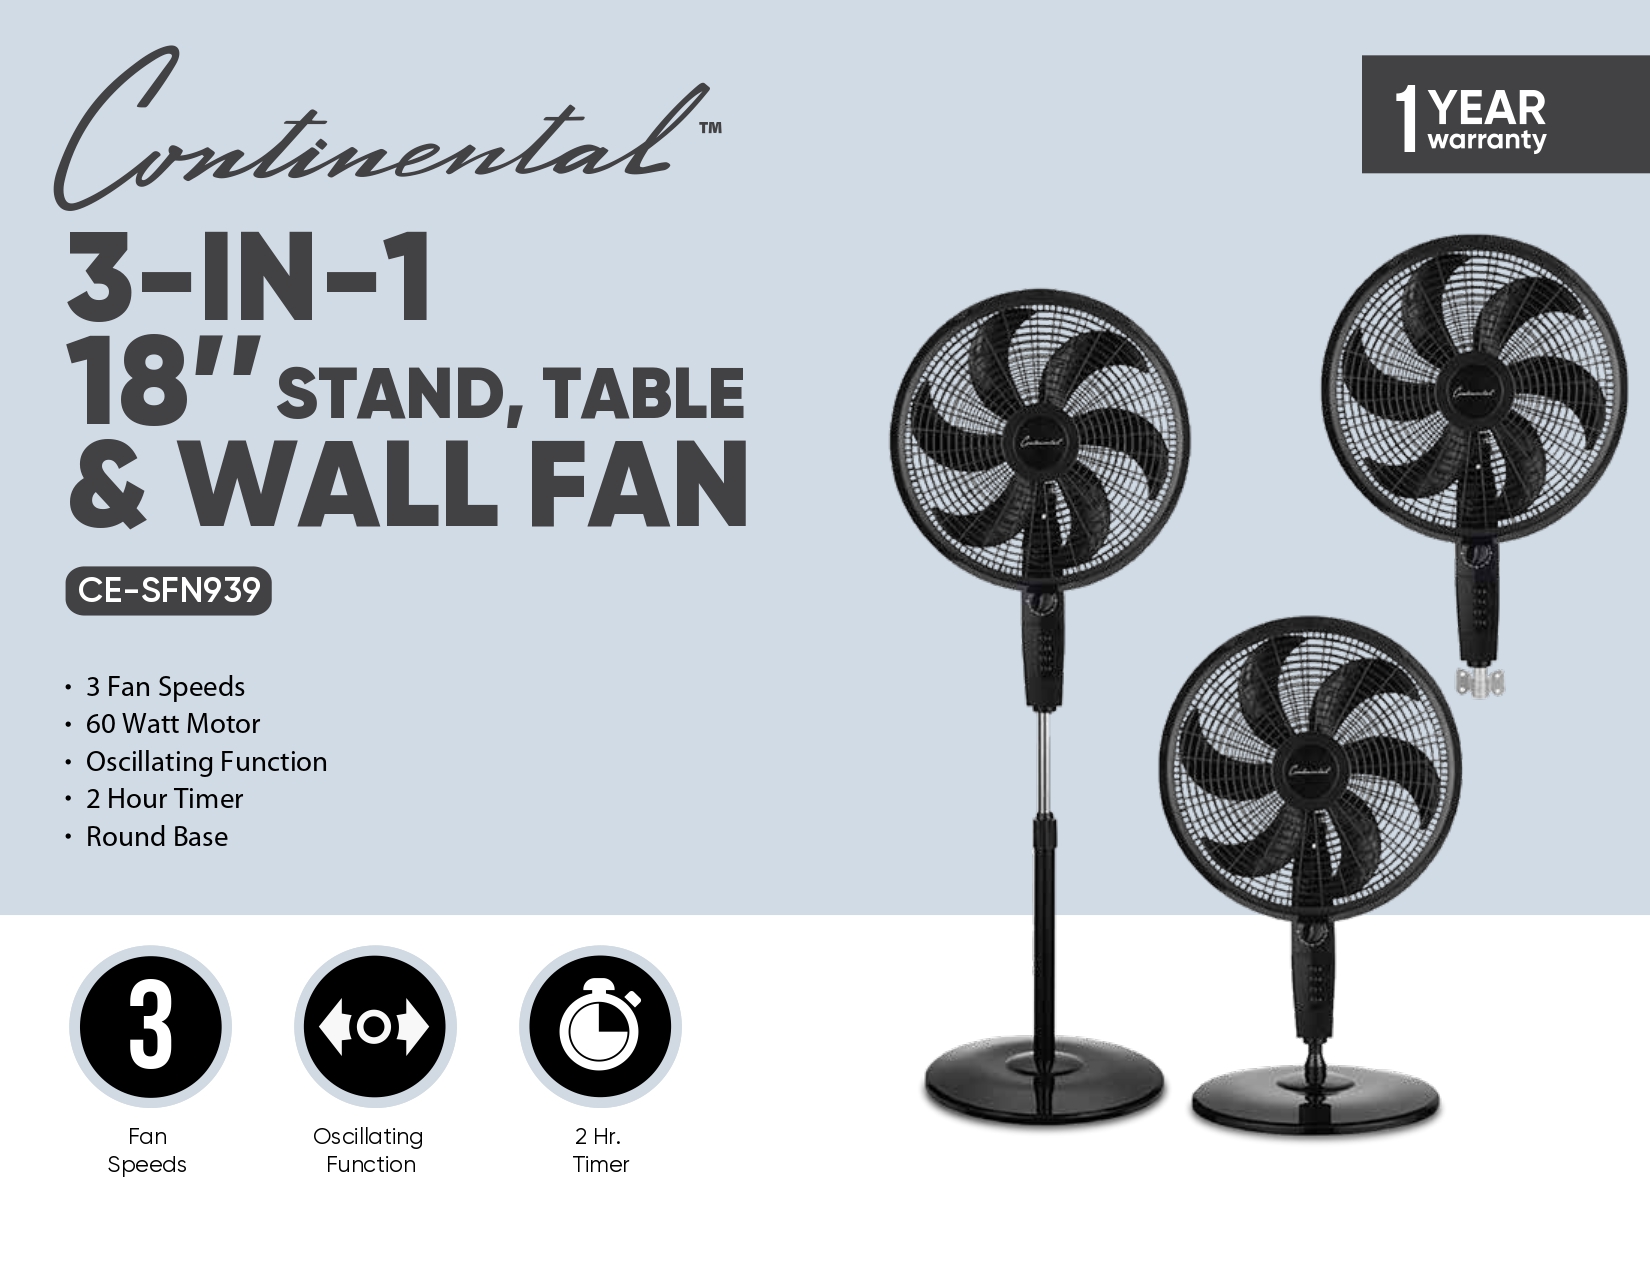 3-IN-1 18" STAND, TABLE & WALL FAN